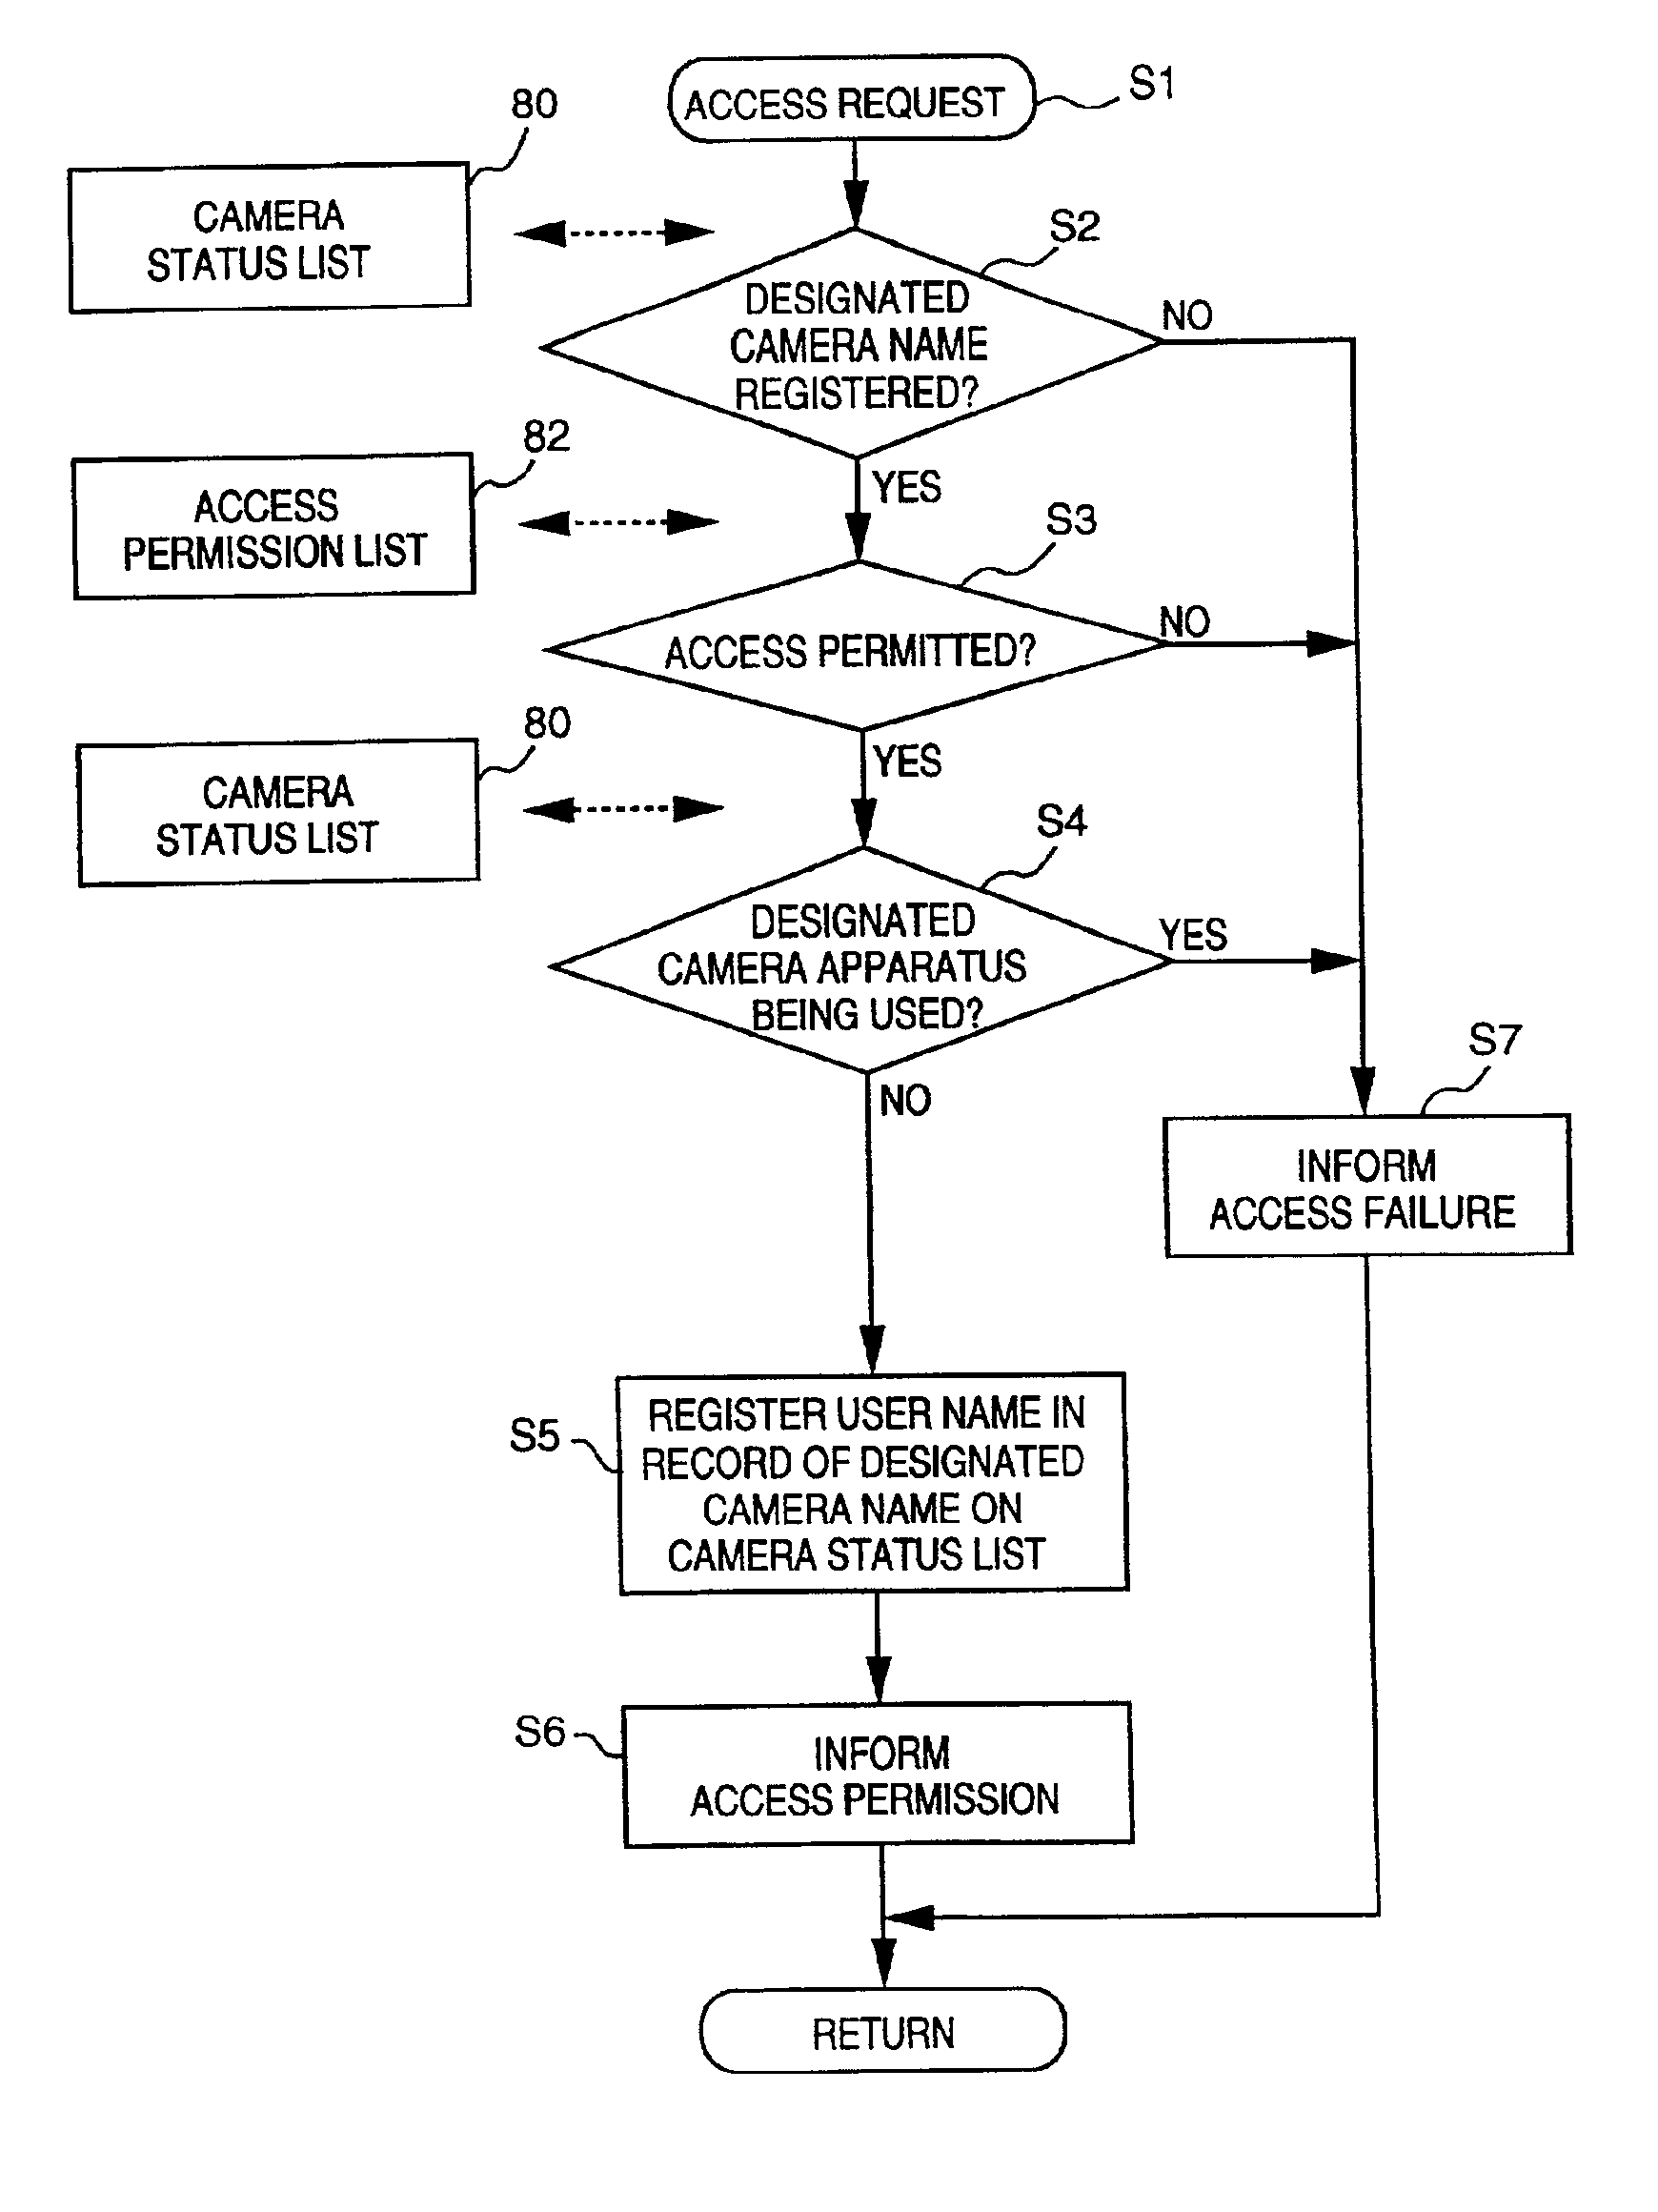 Remote control system and access control method for information input apparatus with limitation by user for image access and camemremote control